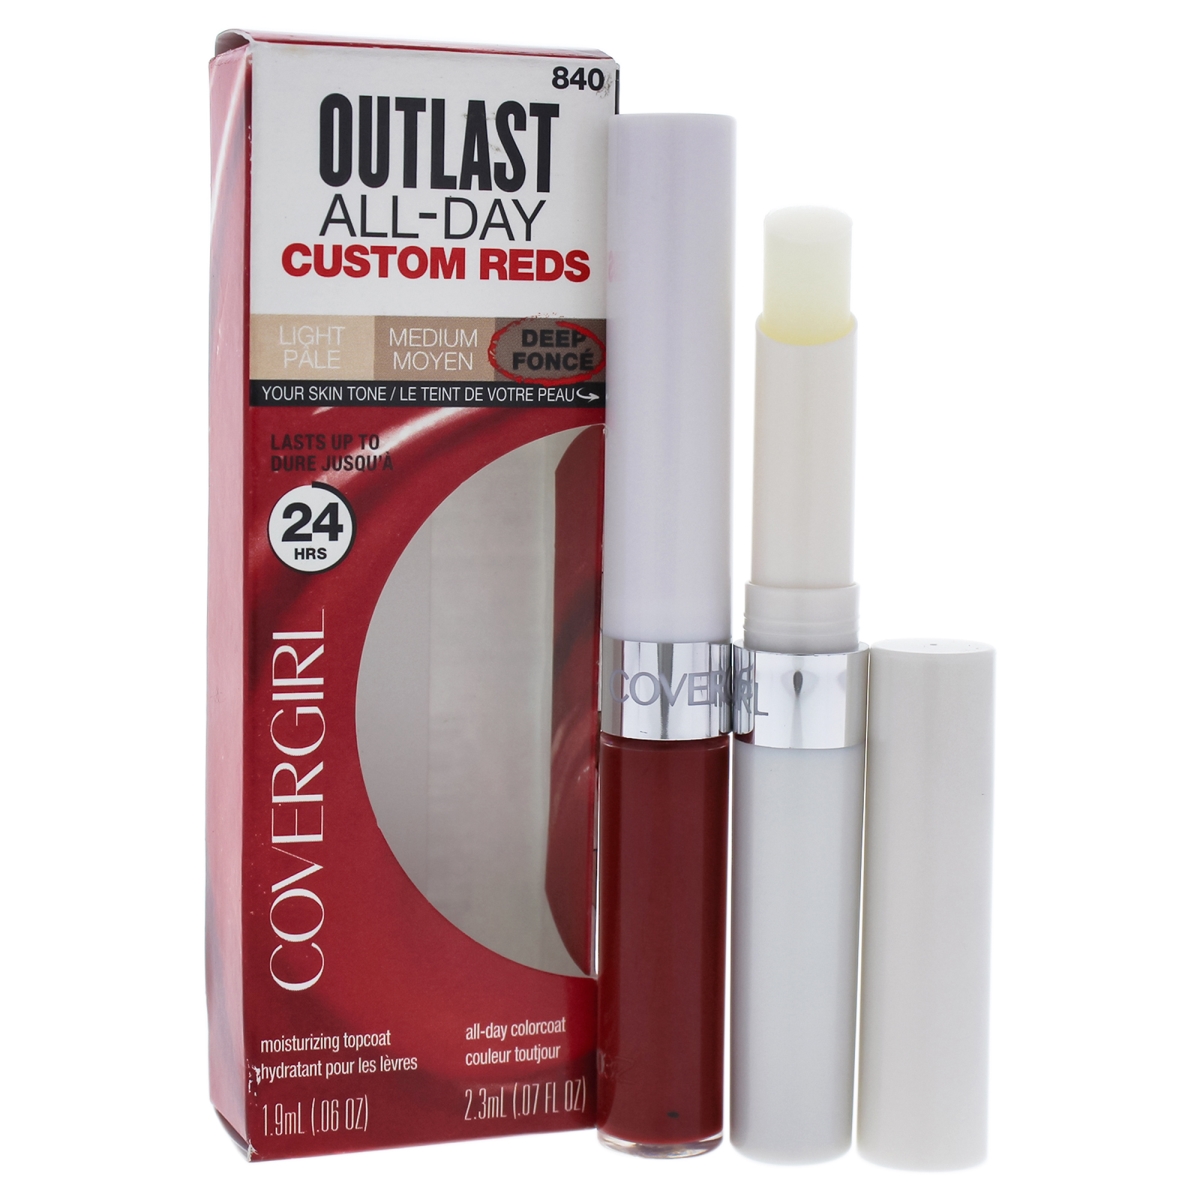 I0085054 Outlast All-day Custom Reds Lipcolor - 840 Signature Scarlet - 0.13 Oz